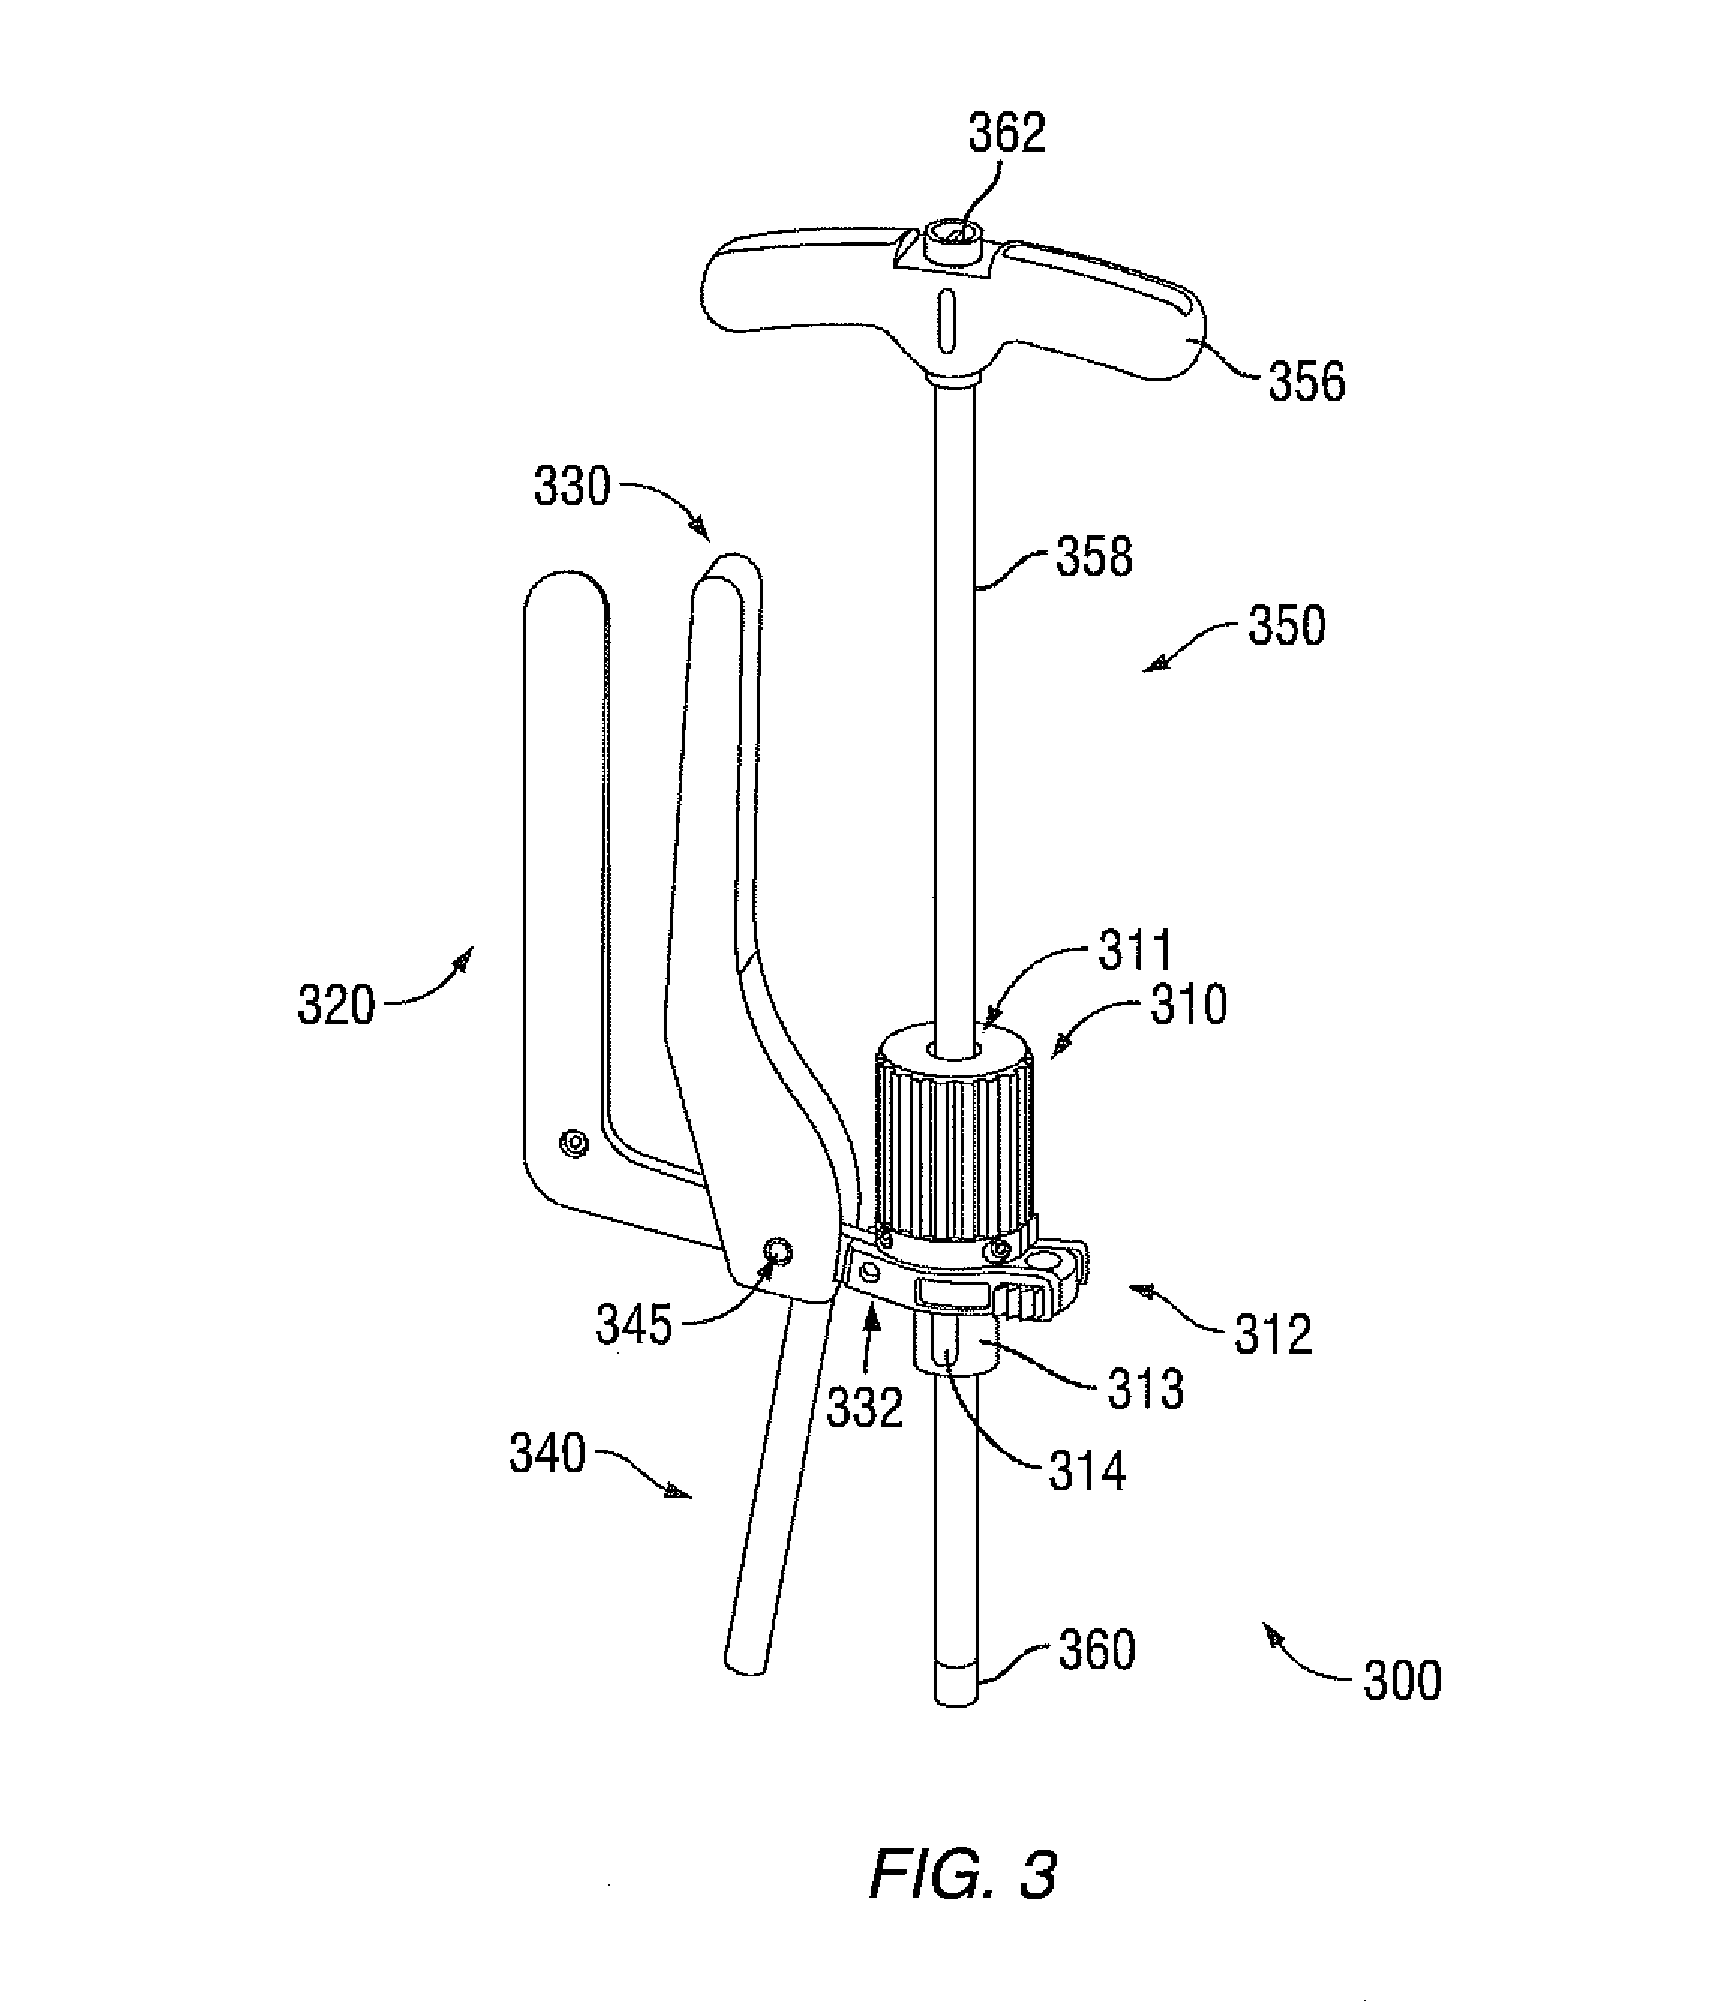 Surgical instrument with integrated reduction and distraction mechanisms